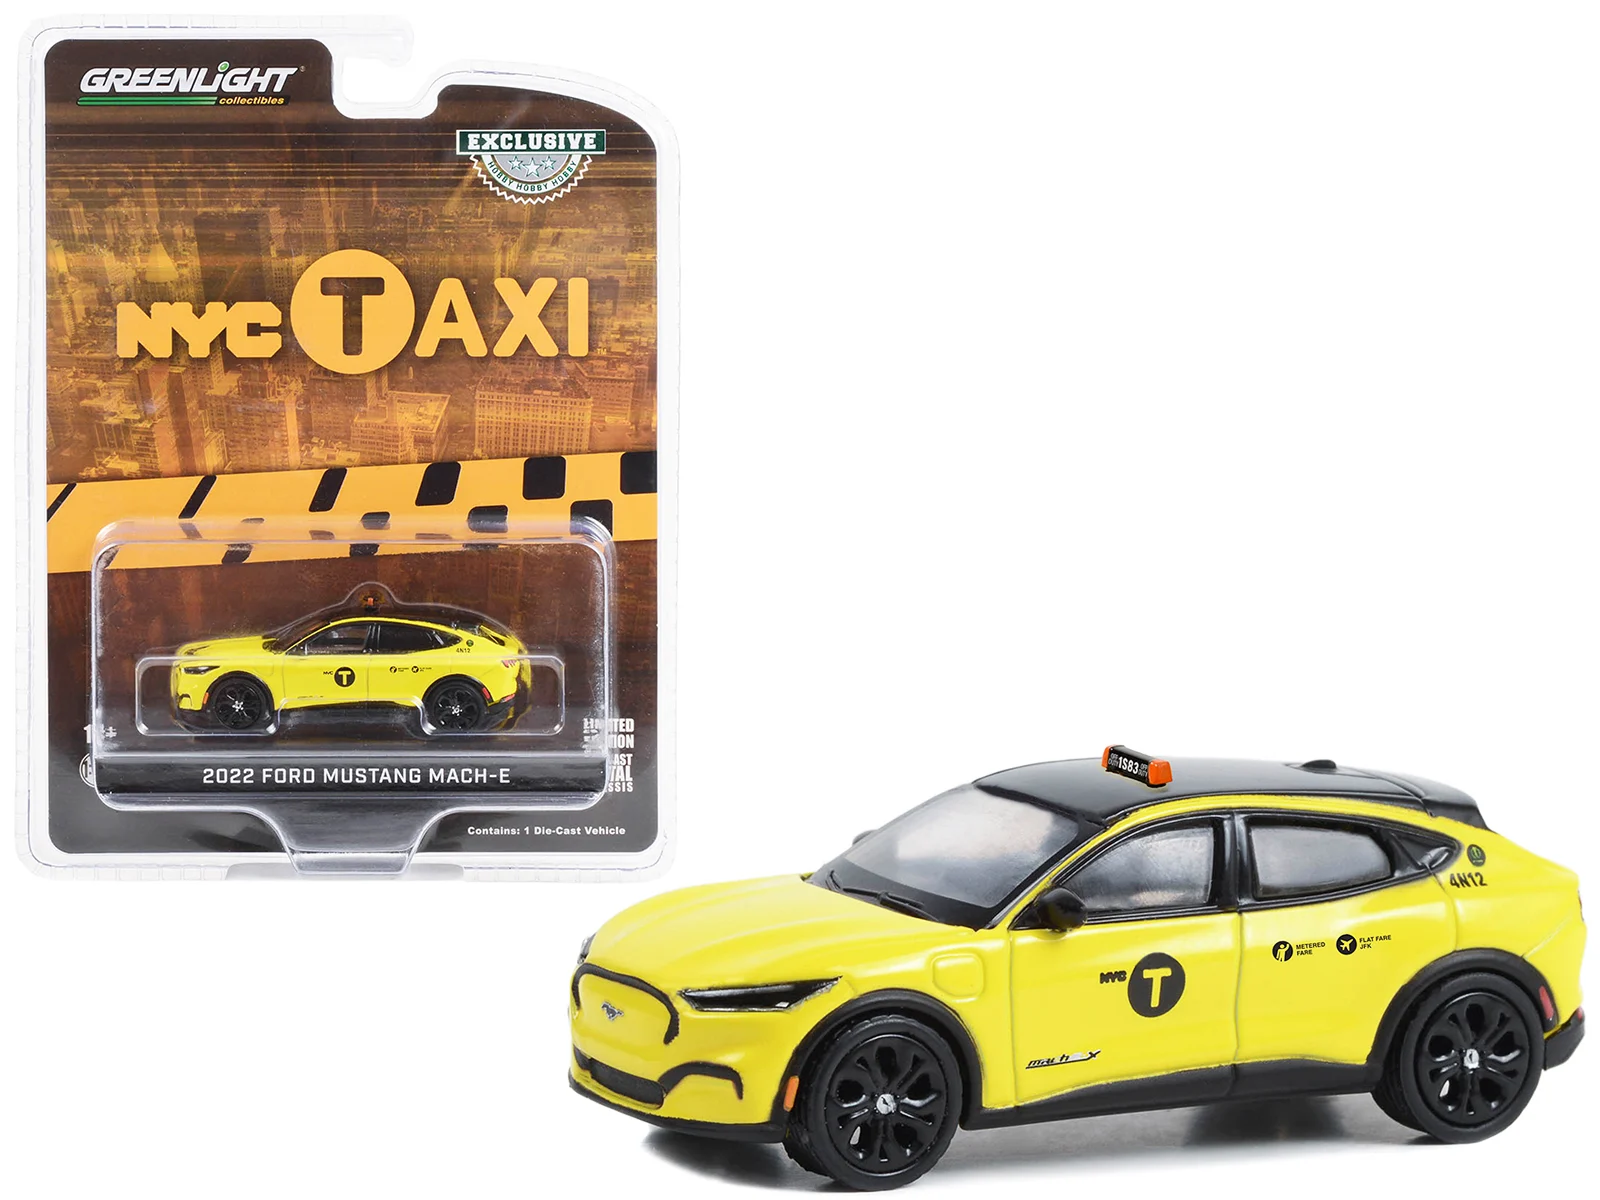 Greenlight 1/64 2022 Ford Mustang Mach-E California Route 1 - NYC Taxi 30430